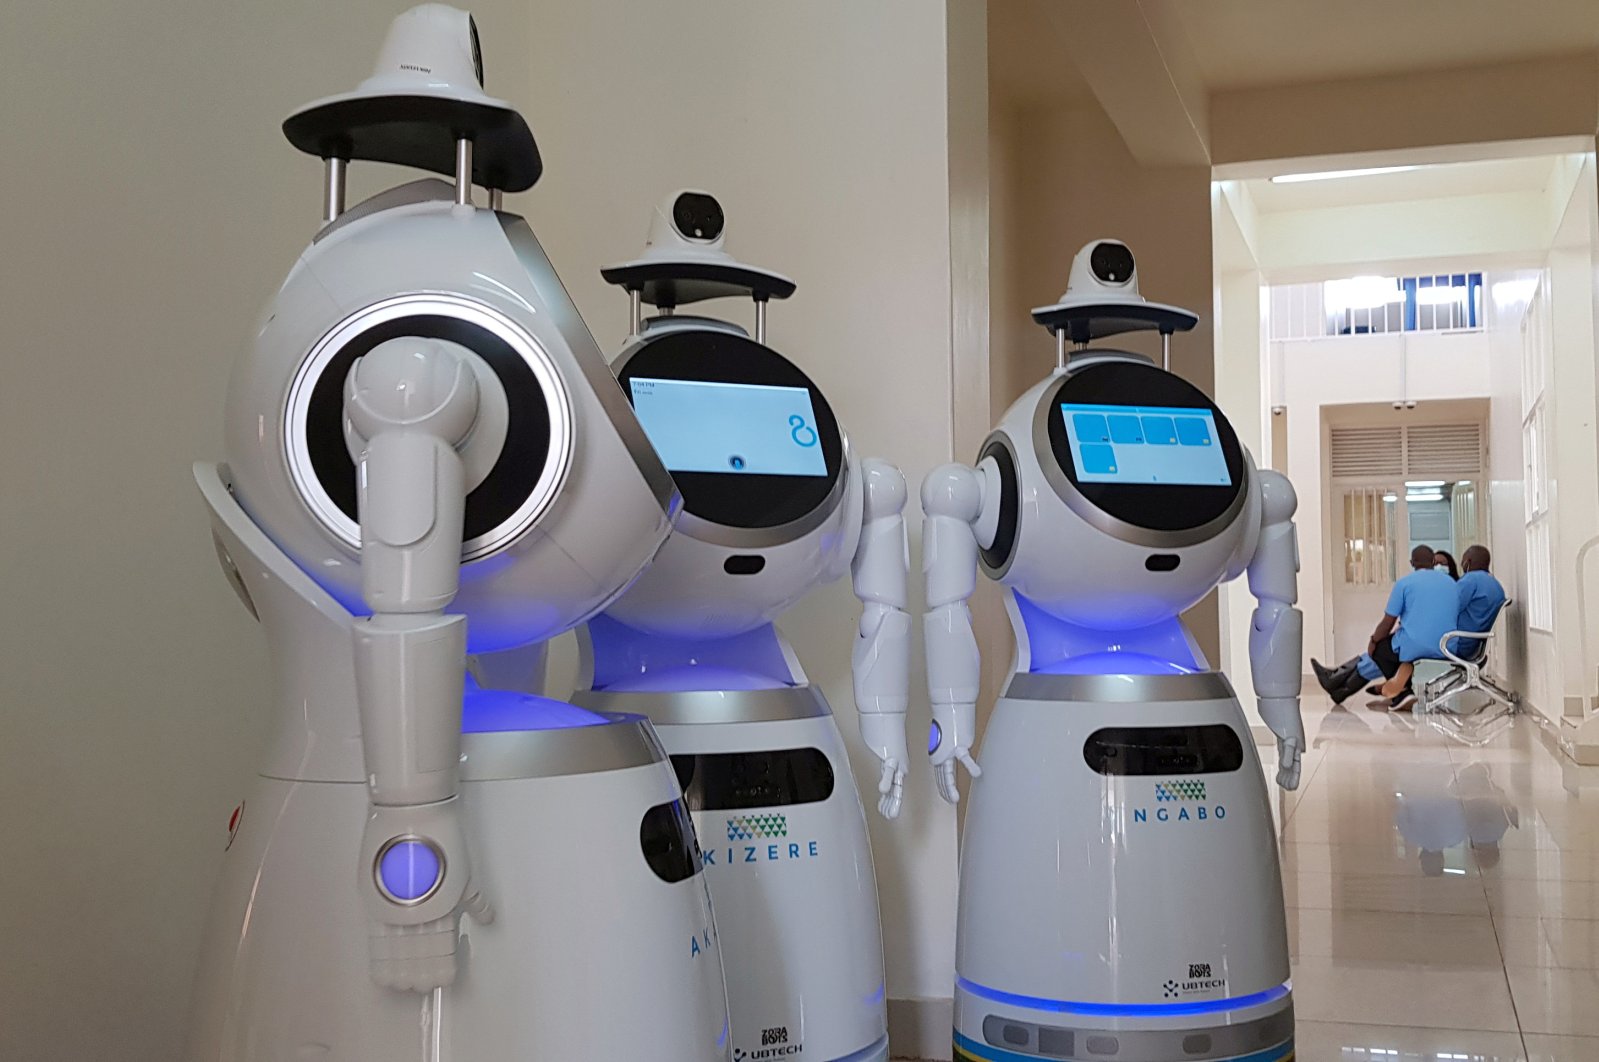 High-tech robots developed by Zora Bots, a Belgium-based company, and donated by the United Nations Development Program (UNDP) are seen during a demonstration at the Kanyinya treatment center that treats COVID-19 patients, in Kigali, Rwanda, May 29, 2020. (REUTERS Photo)